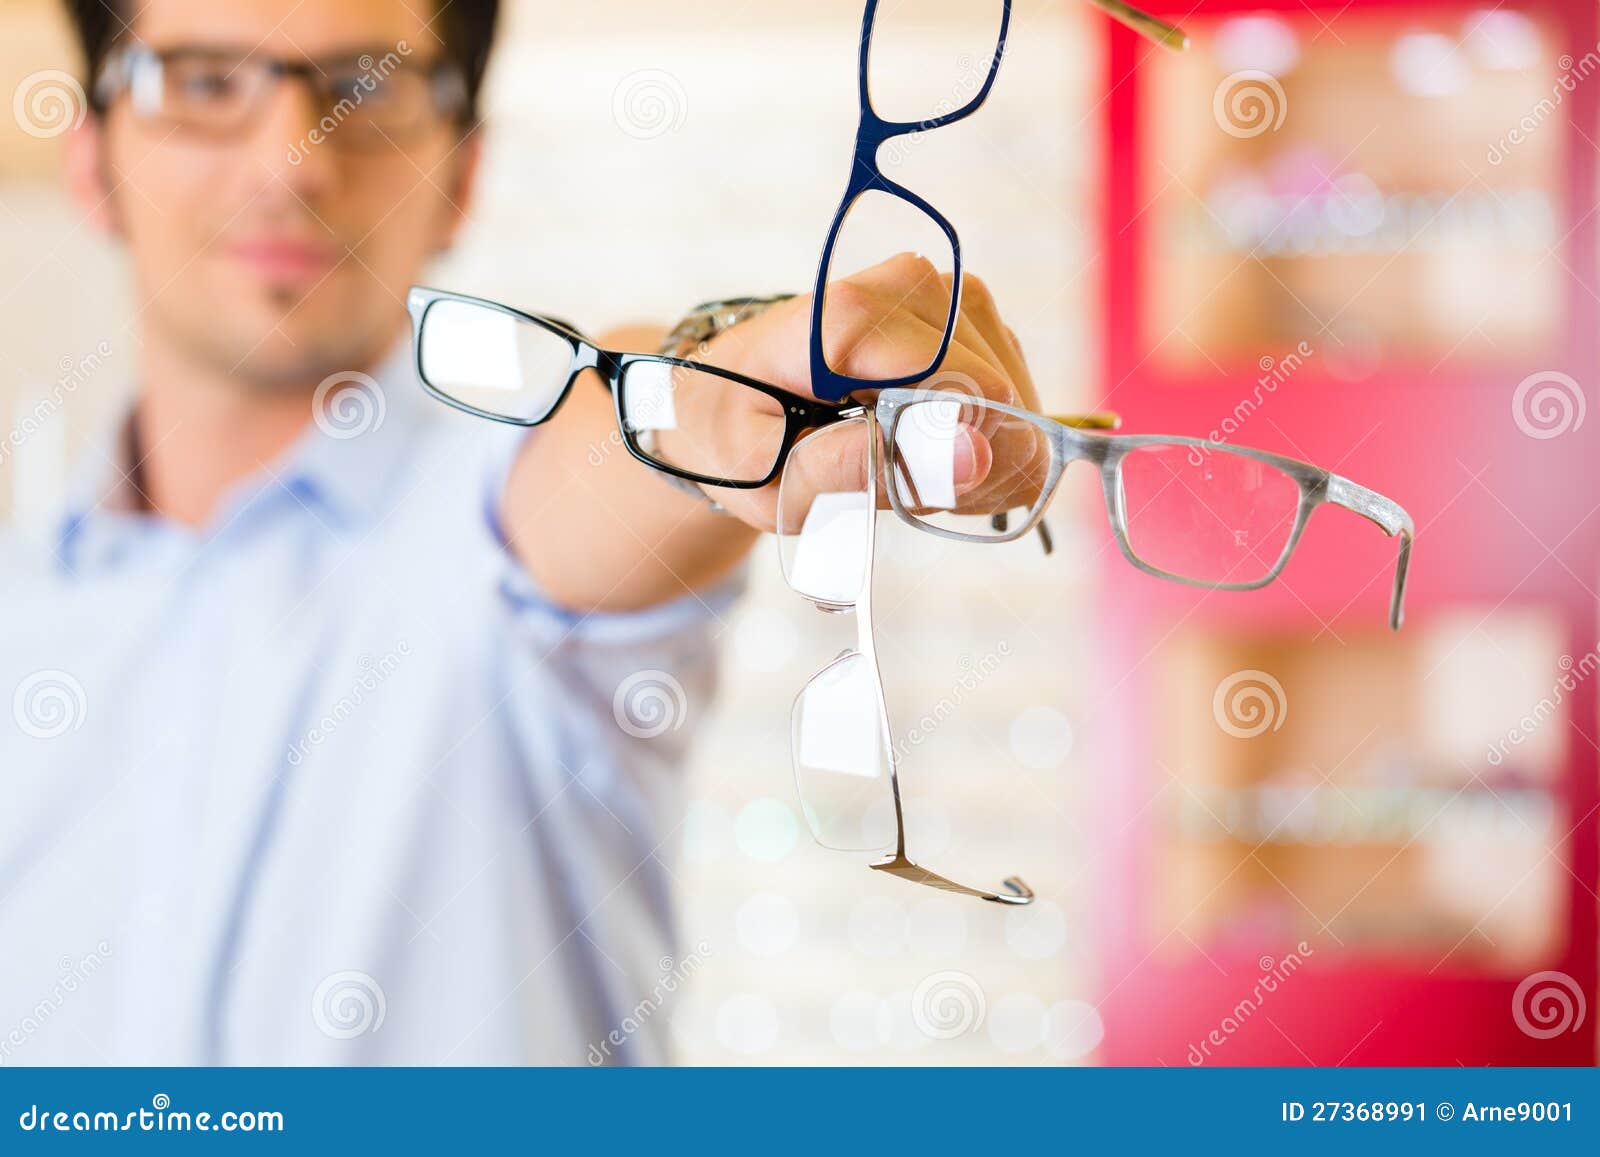 Young Man at Optician with Glasses Stock Image - Image of modern ...